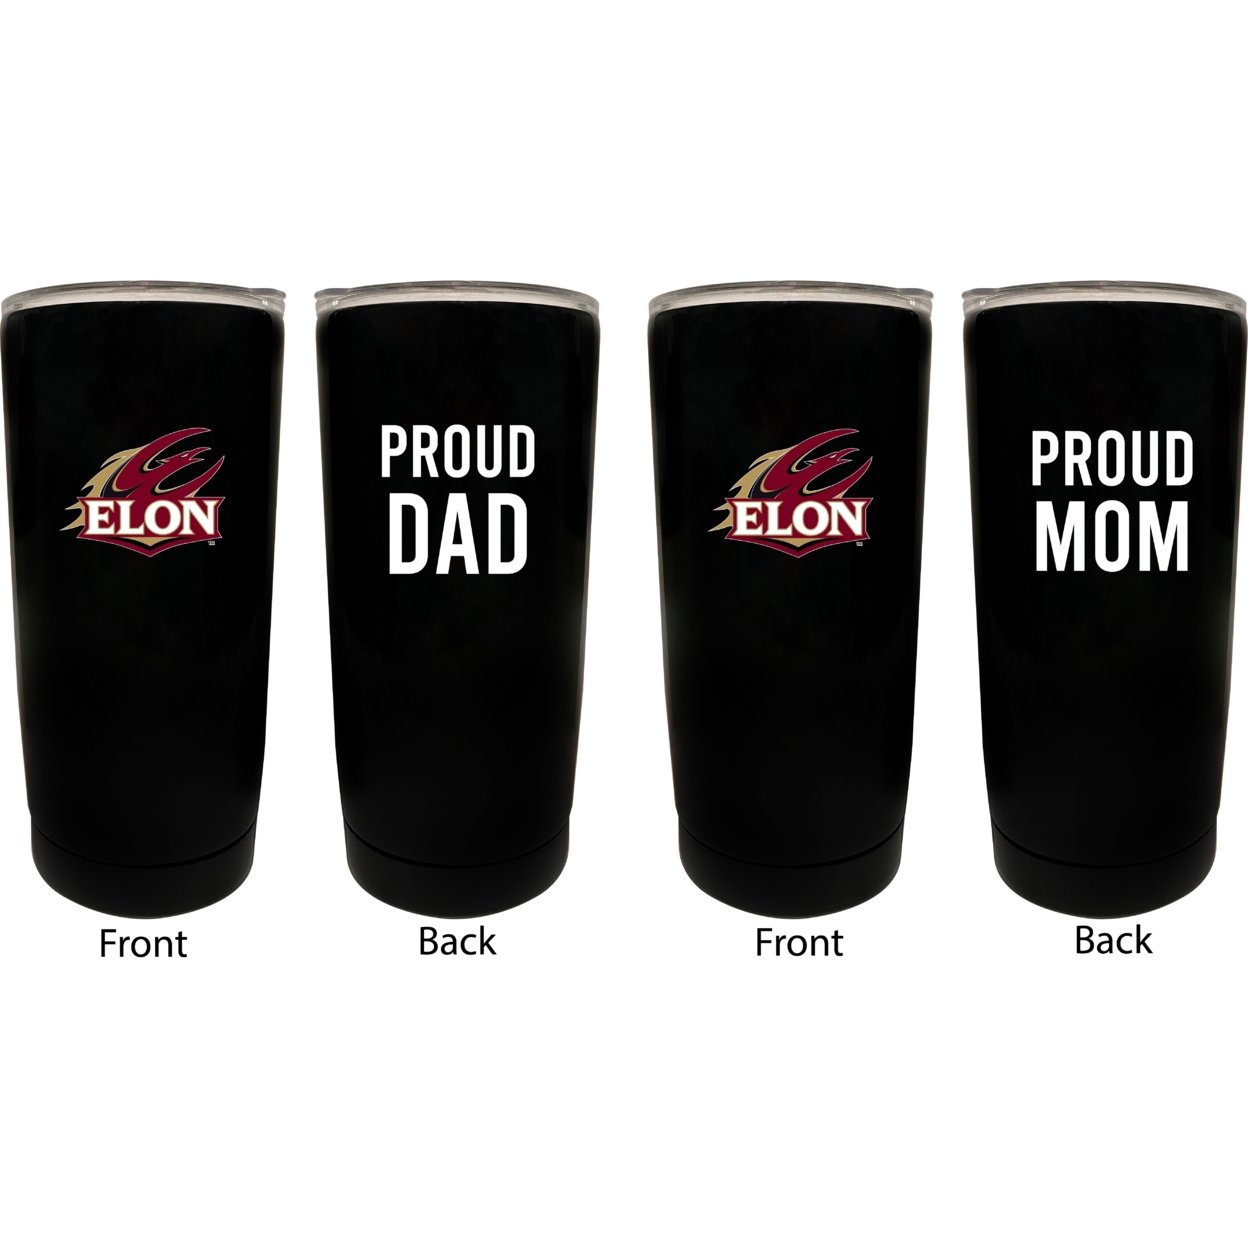 Elon University Proud Mom And Dad 16 Oz Insulated Stainless Steel Tumblers 2 Pack Black.